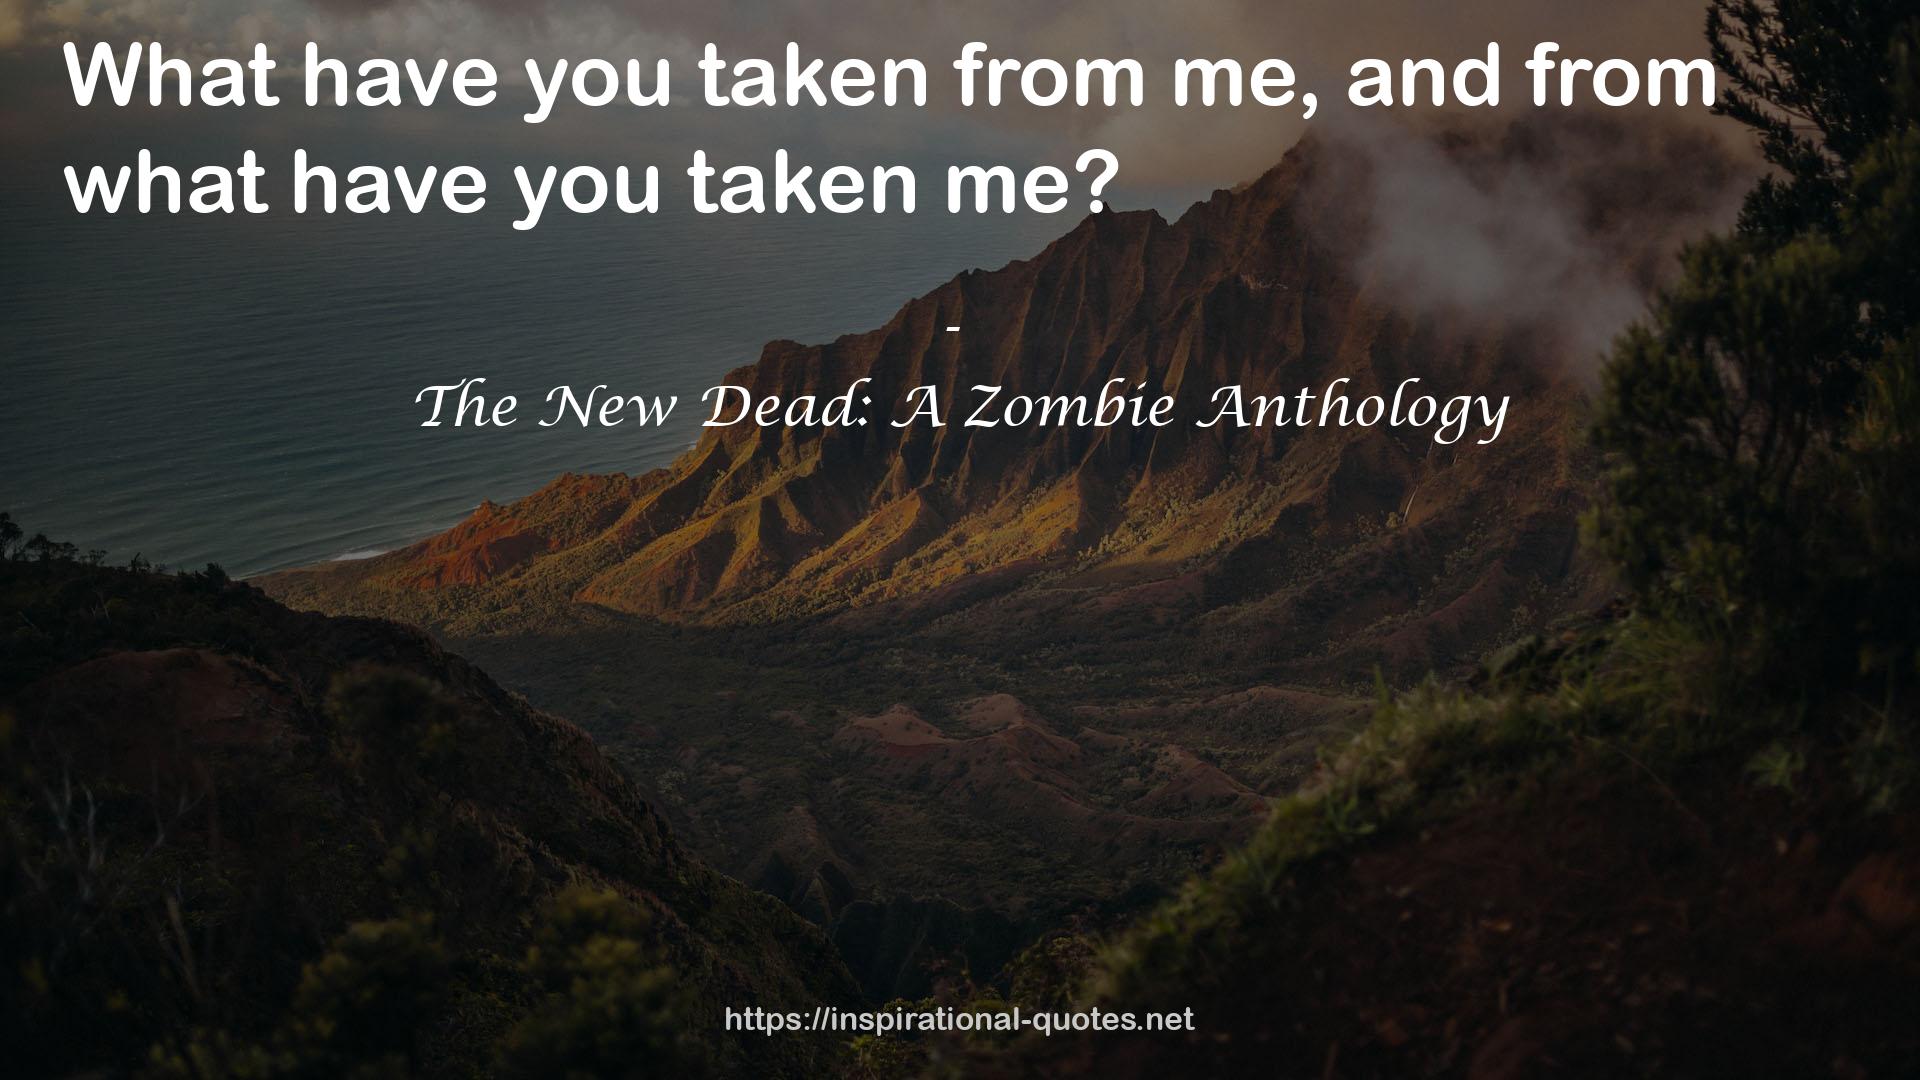 The New Dead: A Zombie Anthology QUOTES